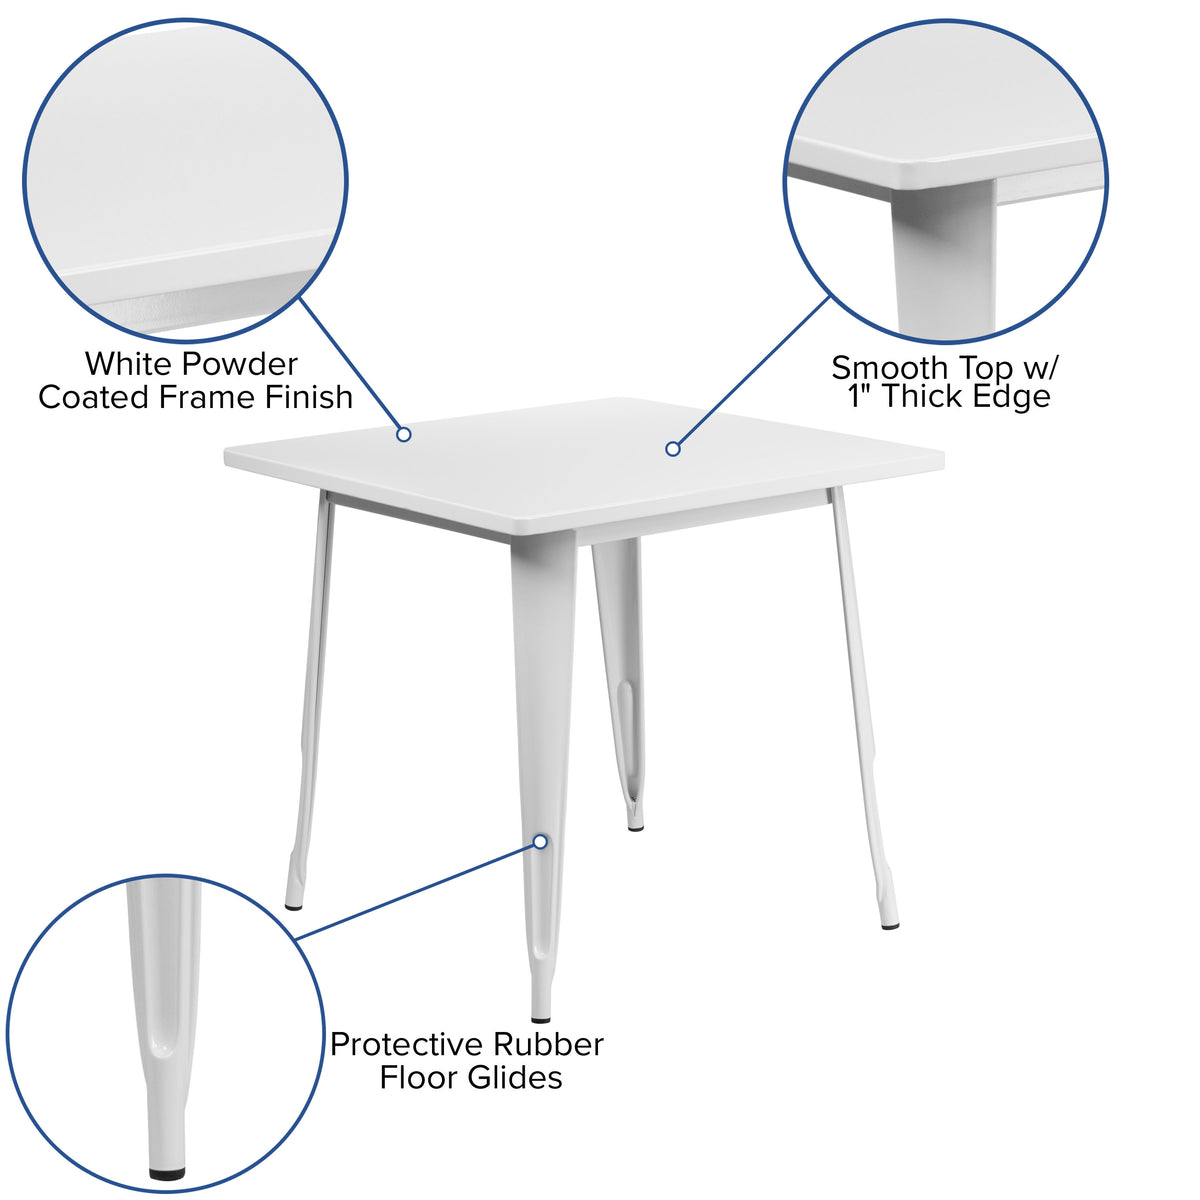 White |#| 31.5inch Square White Metal Indoor-Outdoor Table - Hospitality Furniture